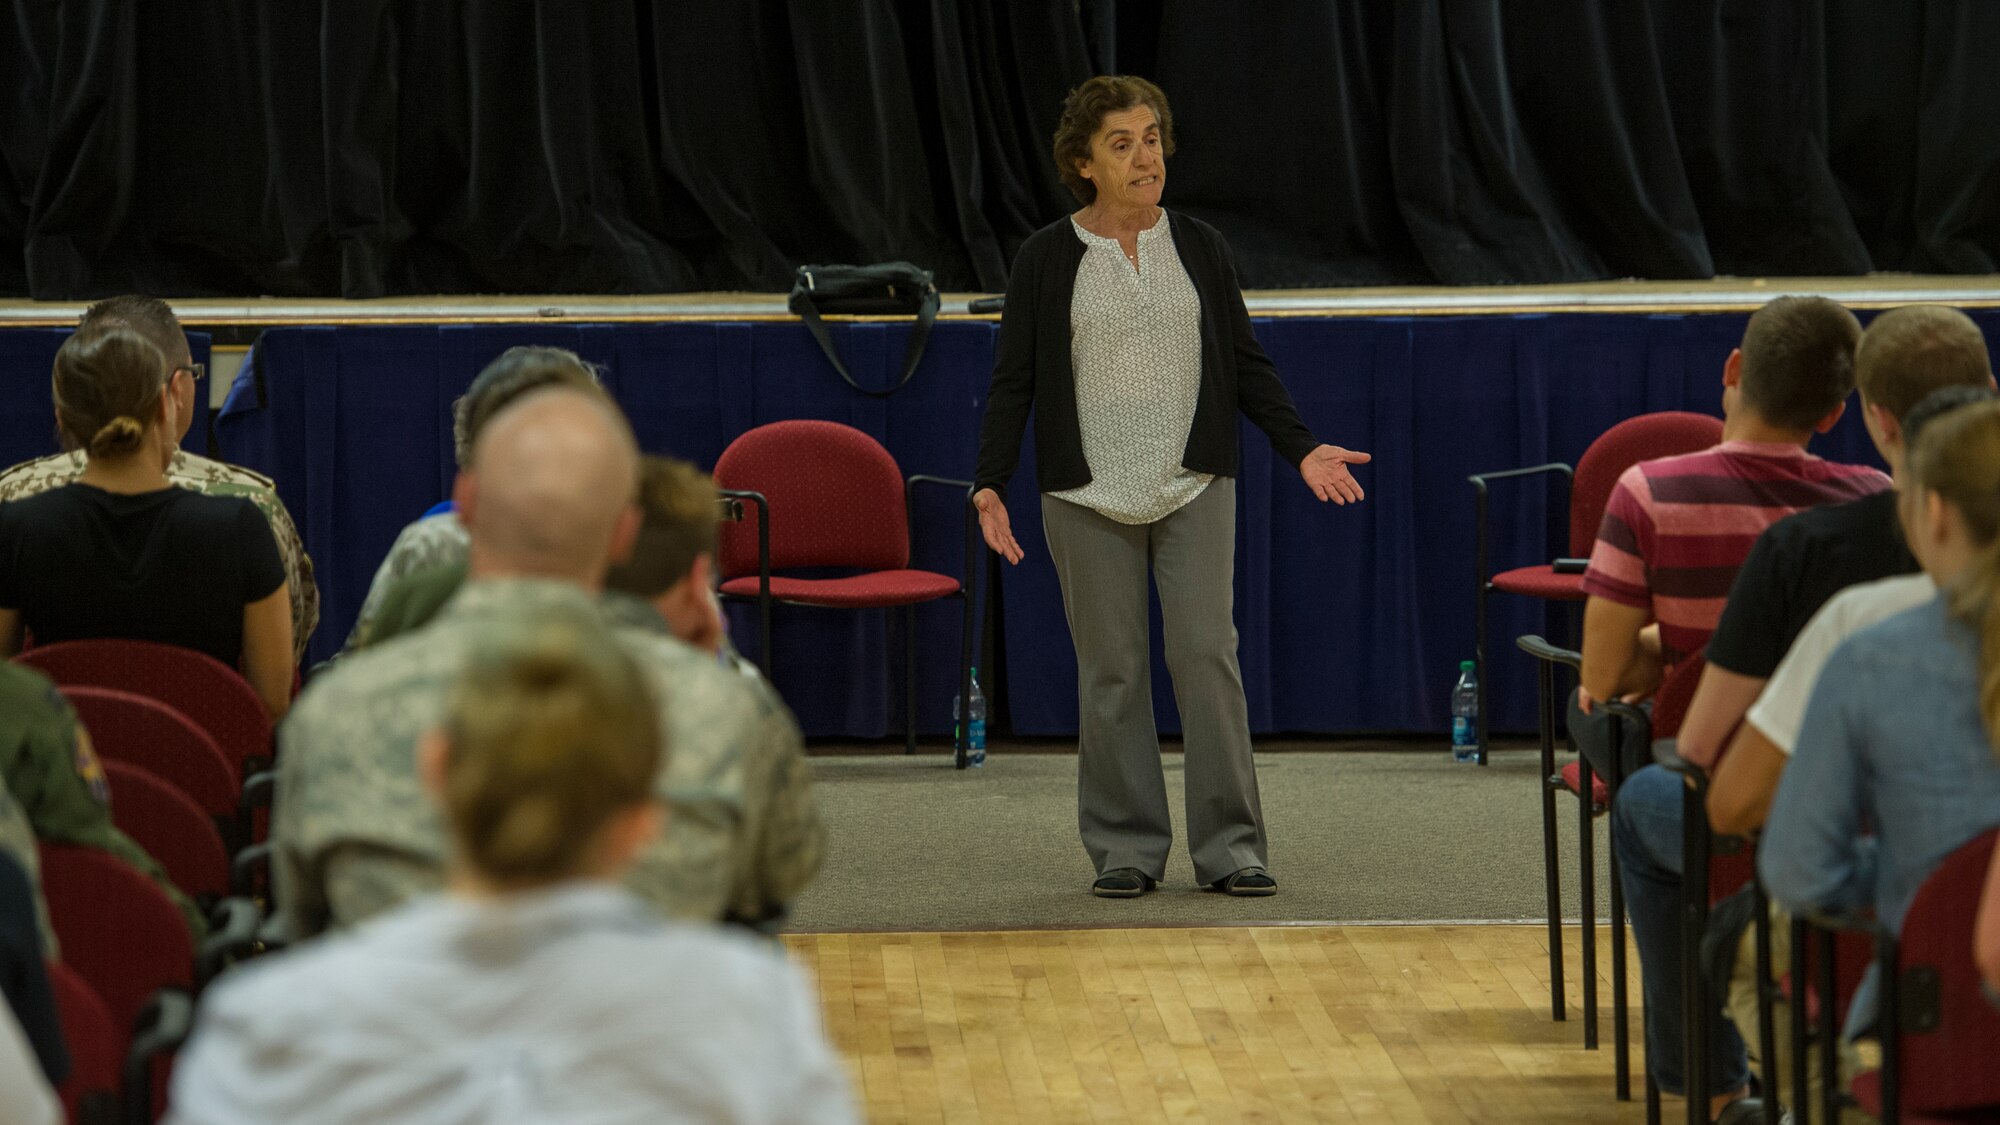 Theresa Dulgov, Holocaust survivor, tells the story of her experience living through the Holocaust during the Holocaust day of remembrance at Holloman Air Force Base, N.M., April 21, 2015. The German Air Force and Holloman invited Dr. Gail Wallen, founder and director of the military holocaust education program to speak to military members and a group of advanced placement history students from Alamogordo High School. Along with her were Theresa Dulgov and Lily Brull, both Holocaust survivors. (U.S. Air Force photo by Airman 1st Class Aaron Montoya / Released)